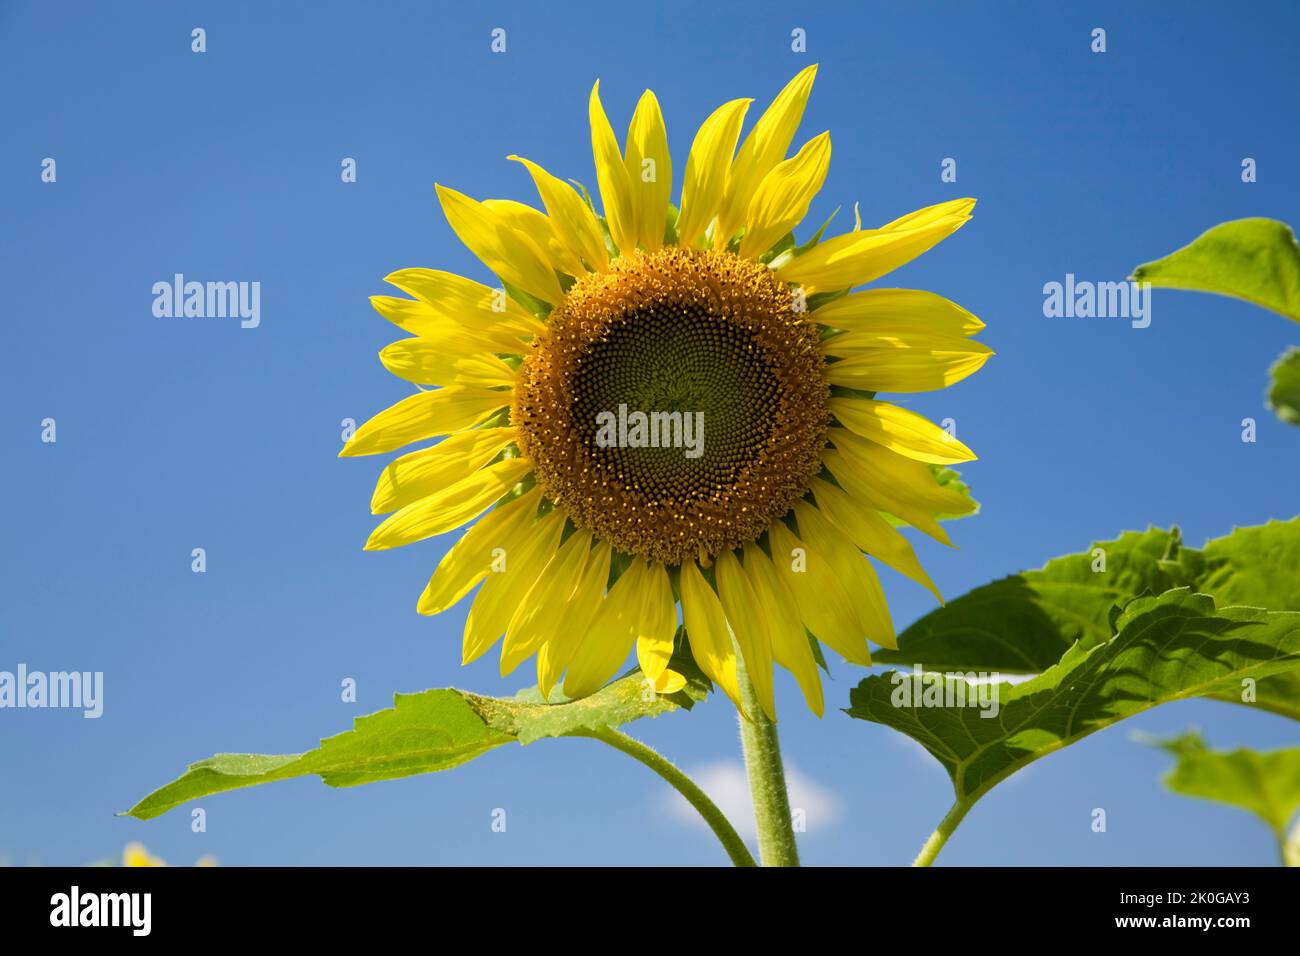 Close-up of Helianthus annus - Sunflower against blue sky in summer. Stock Photo